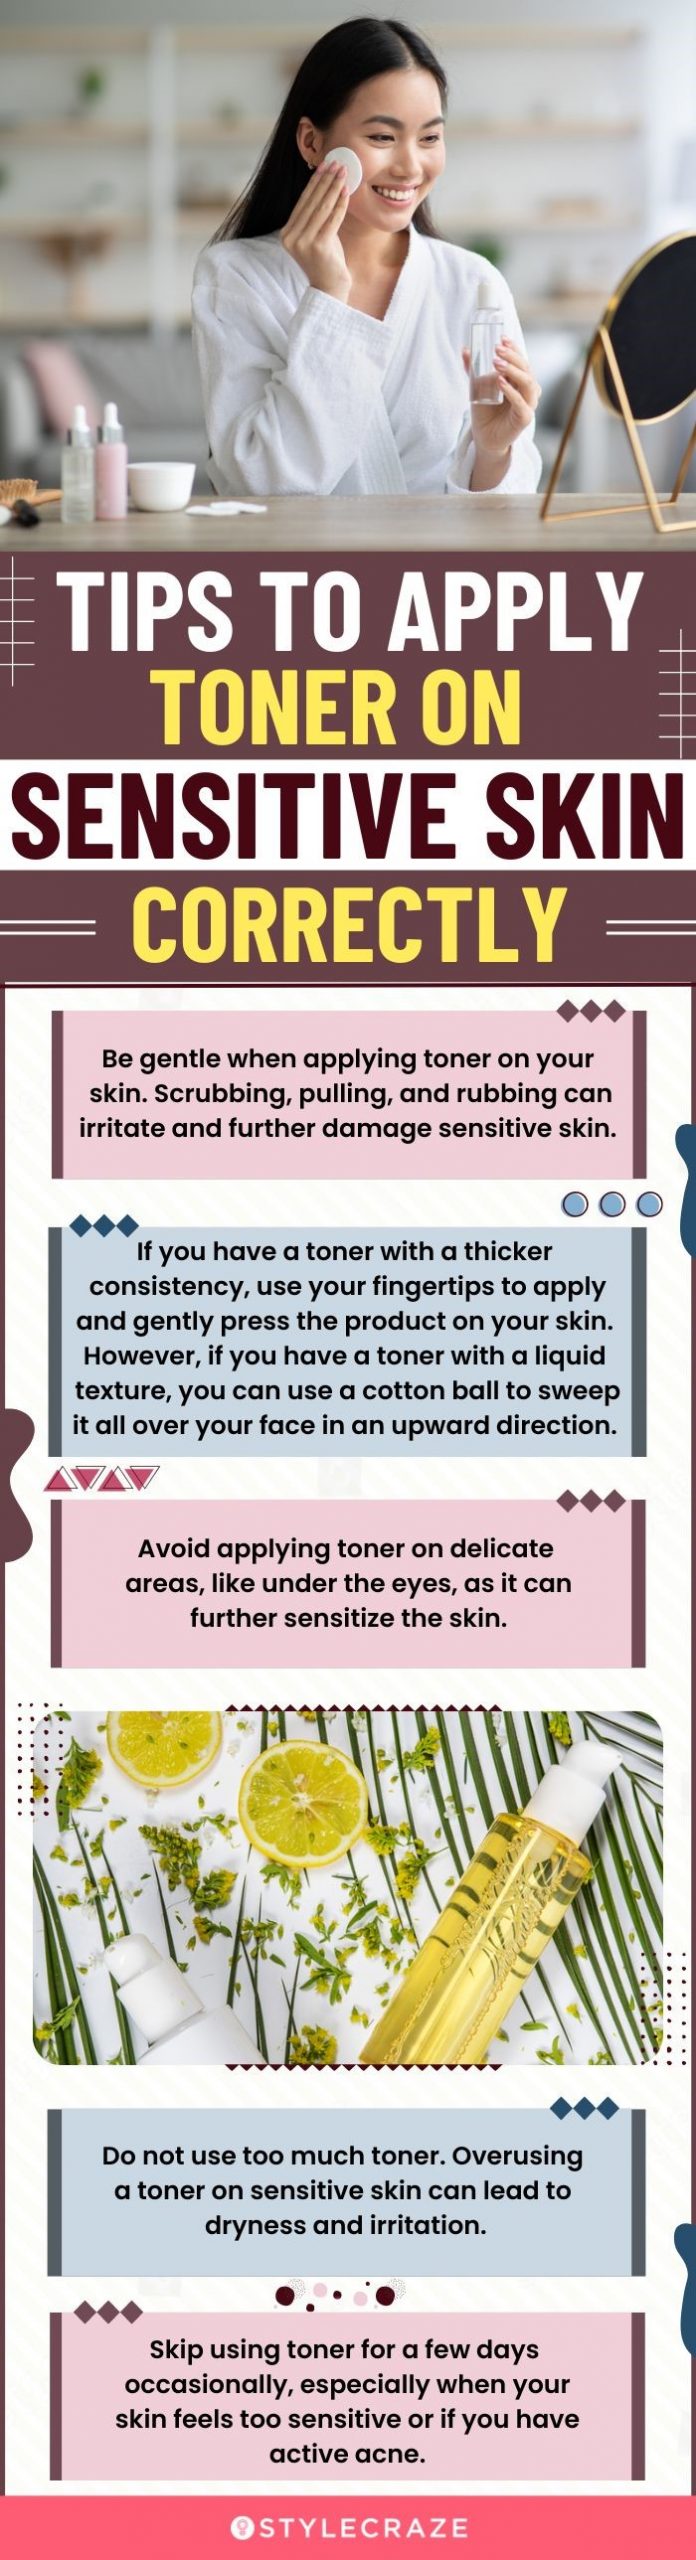 Tips To Apply Toner On Sensitive Skin Correctly (infographic)